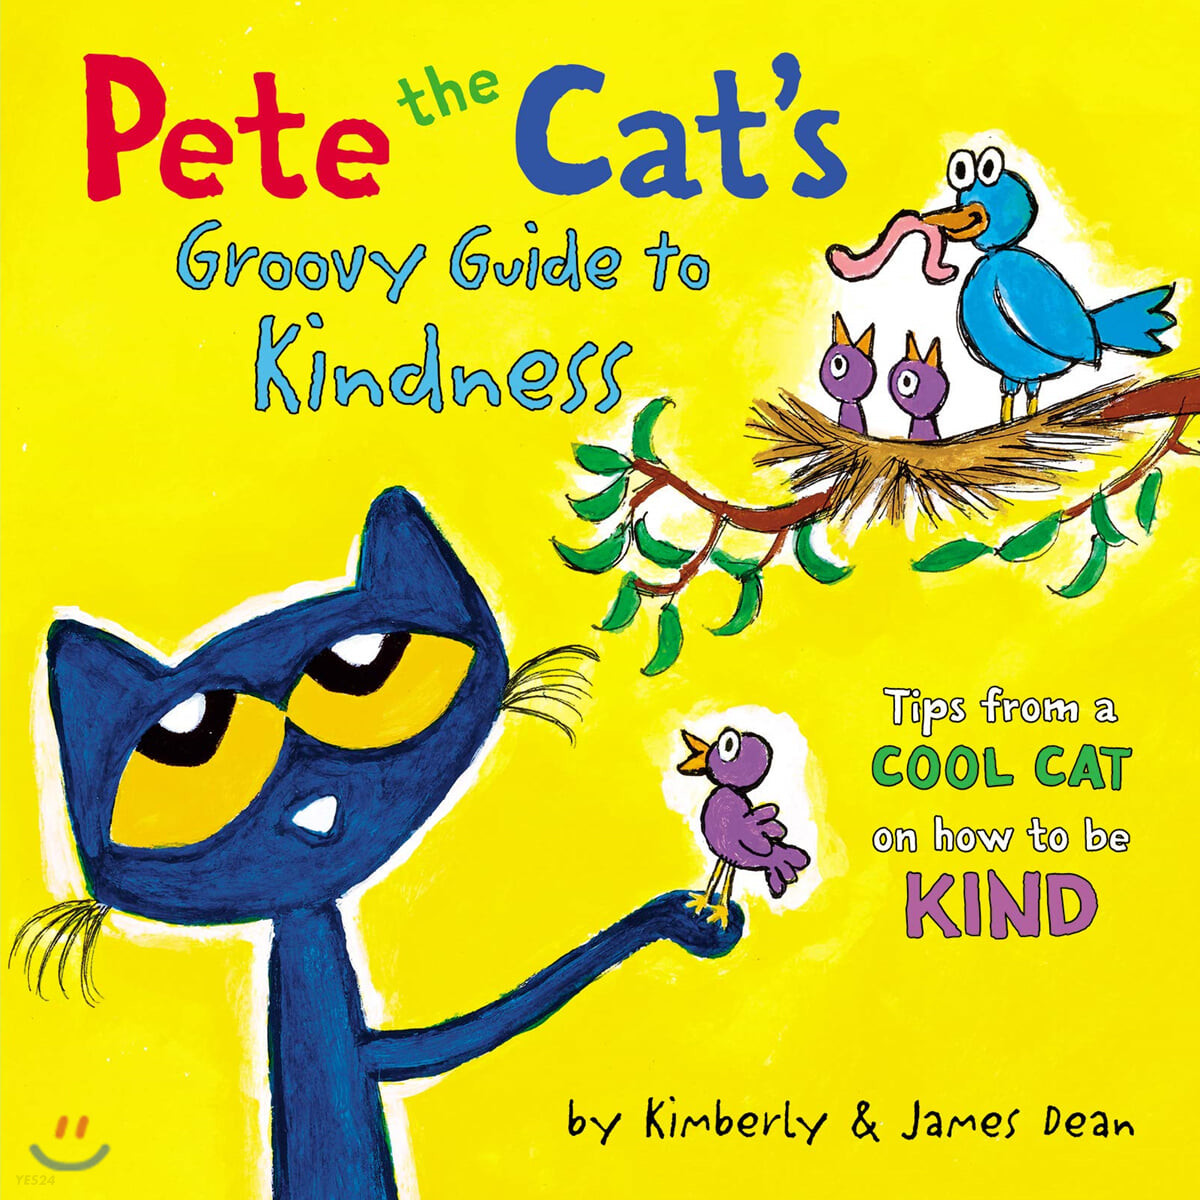 Pete the Cats groovy guide to kindness : tips from a cool cat on how to be kind